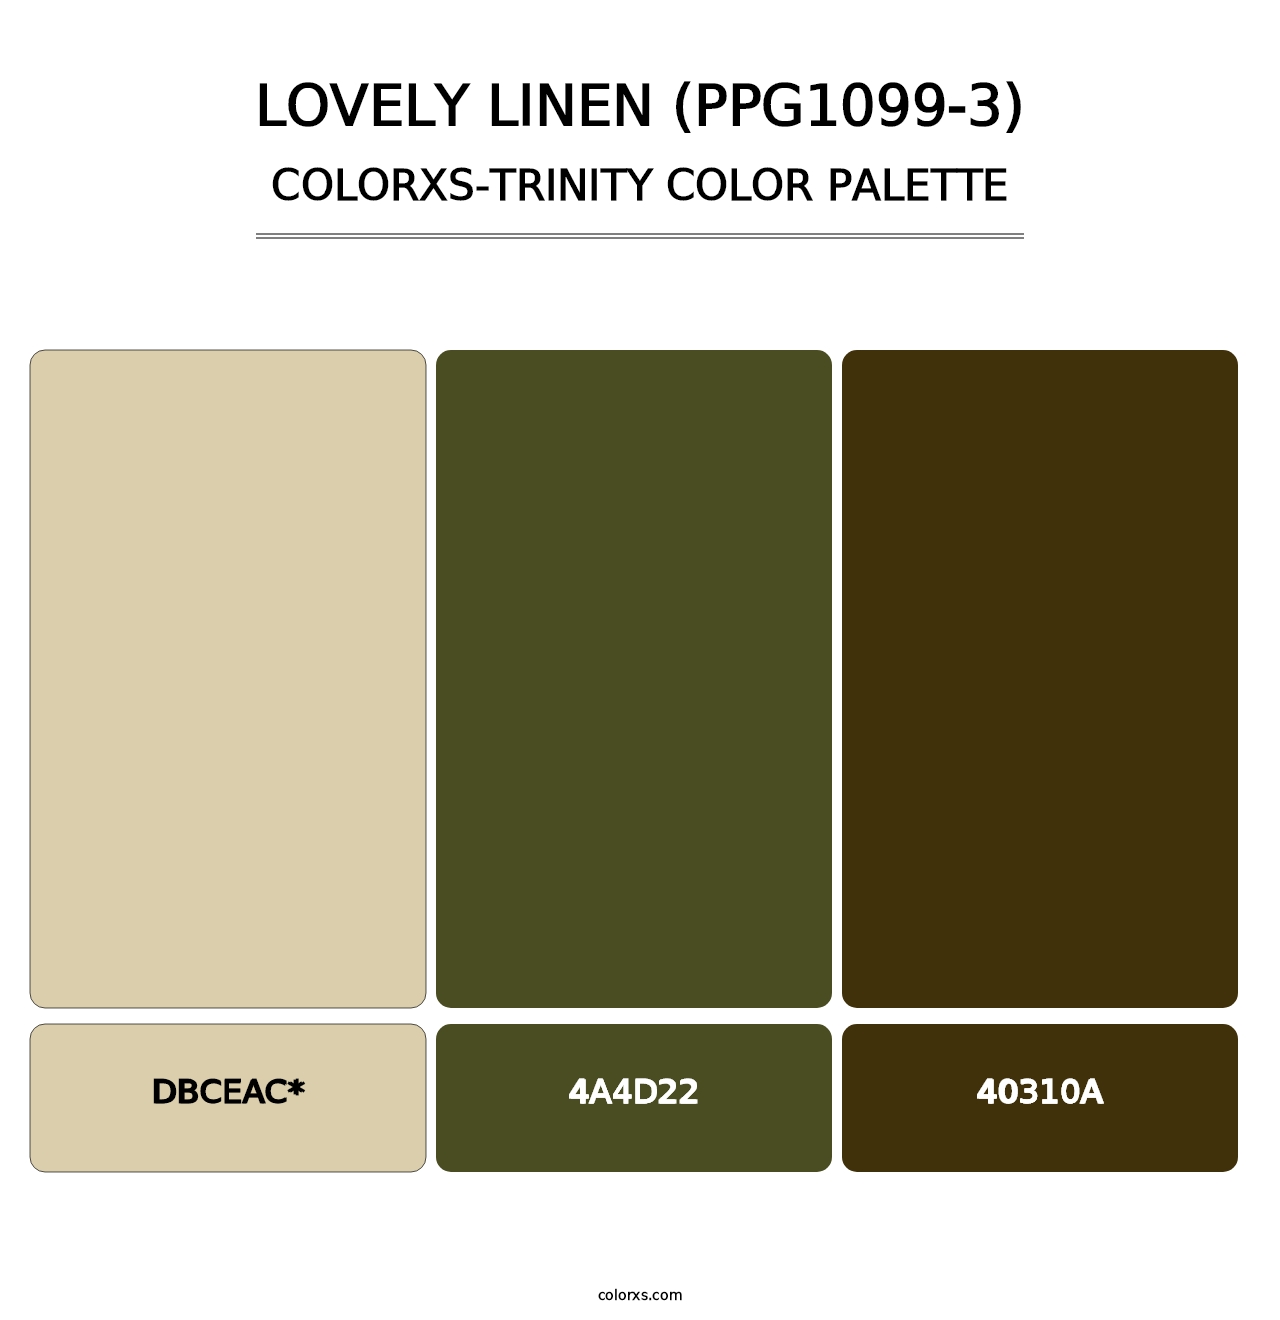 Lovely Linen (PPG1099-3) - Colorxs Trinity Palette